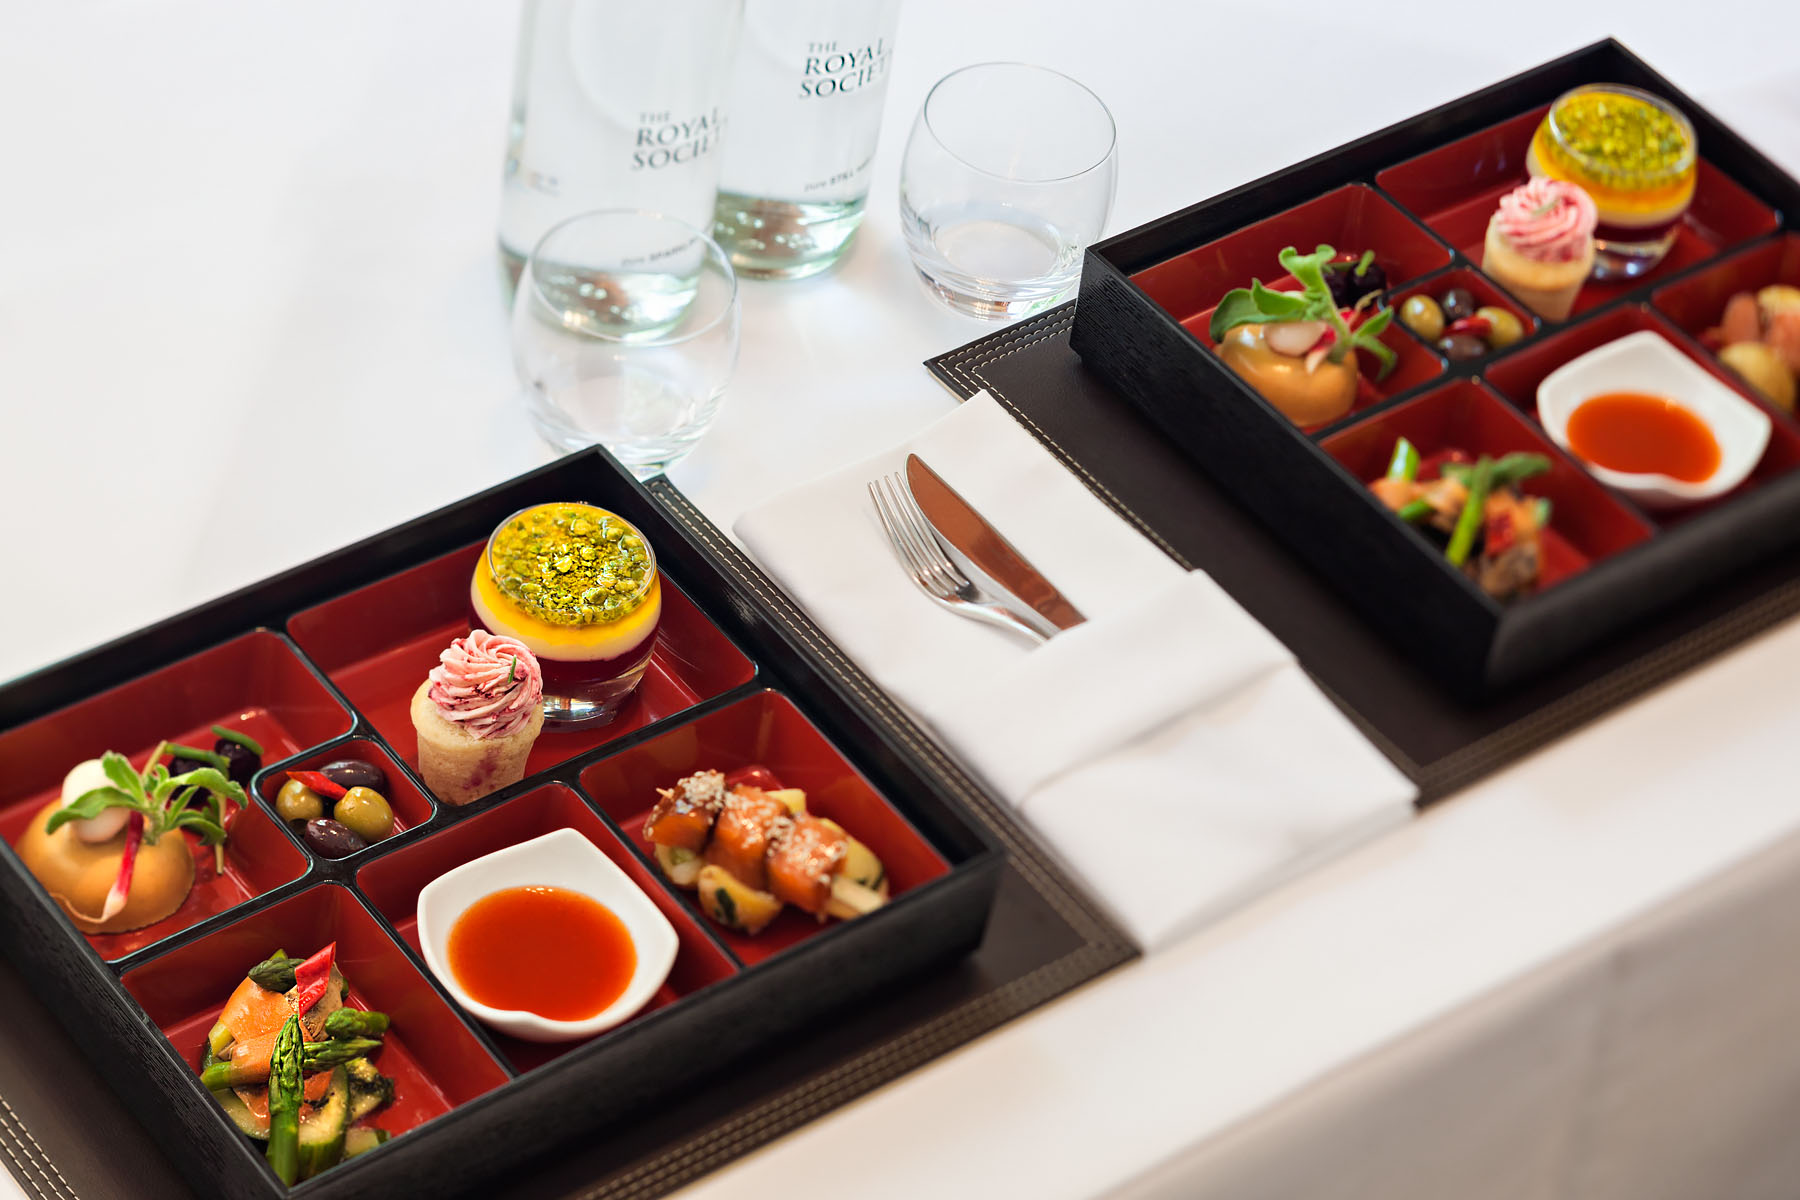 Bento Box concept for lunch service at HQ of worlds oldest scientific academy.Client: Royal Society